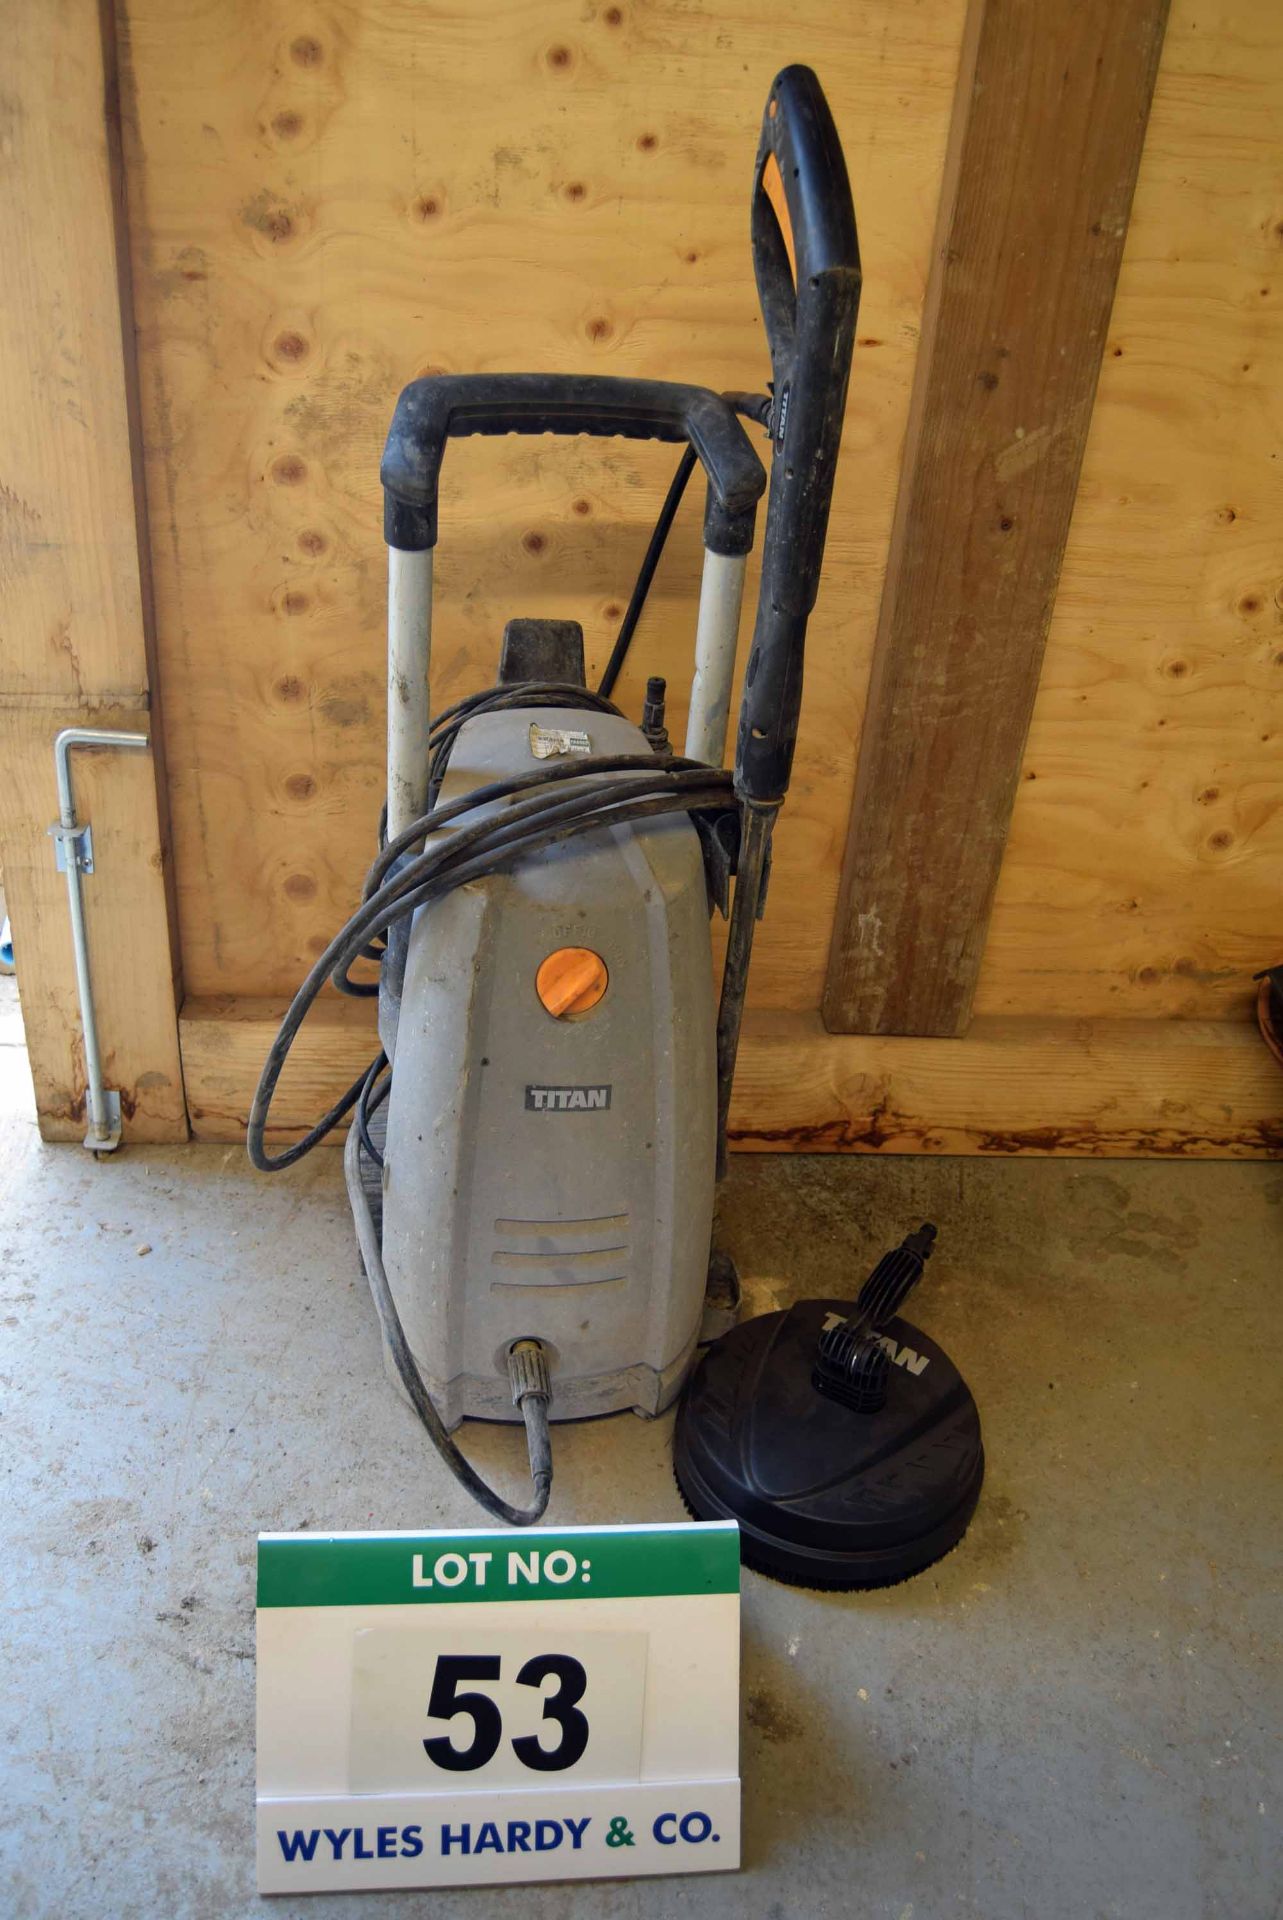 A TITAN 240V AC Powered Portable Pressure Washer with Two Lance Tips, Patio Head and Soap Dispensing